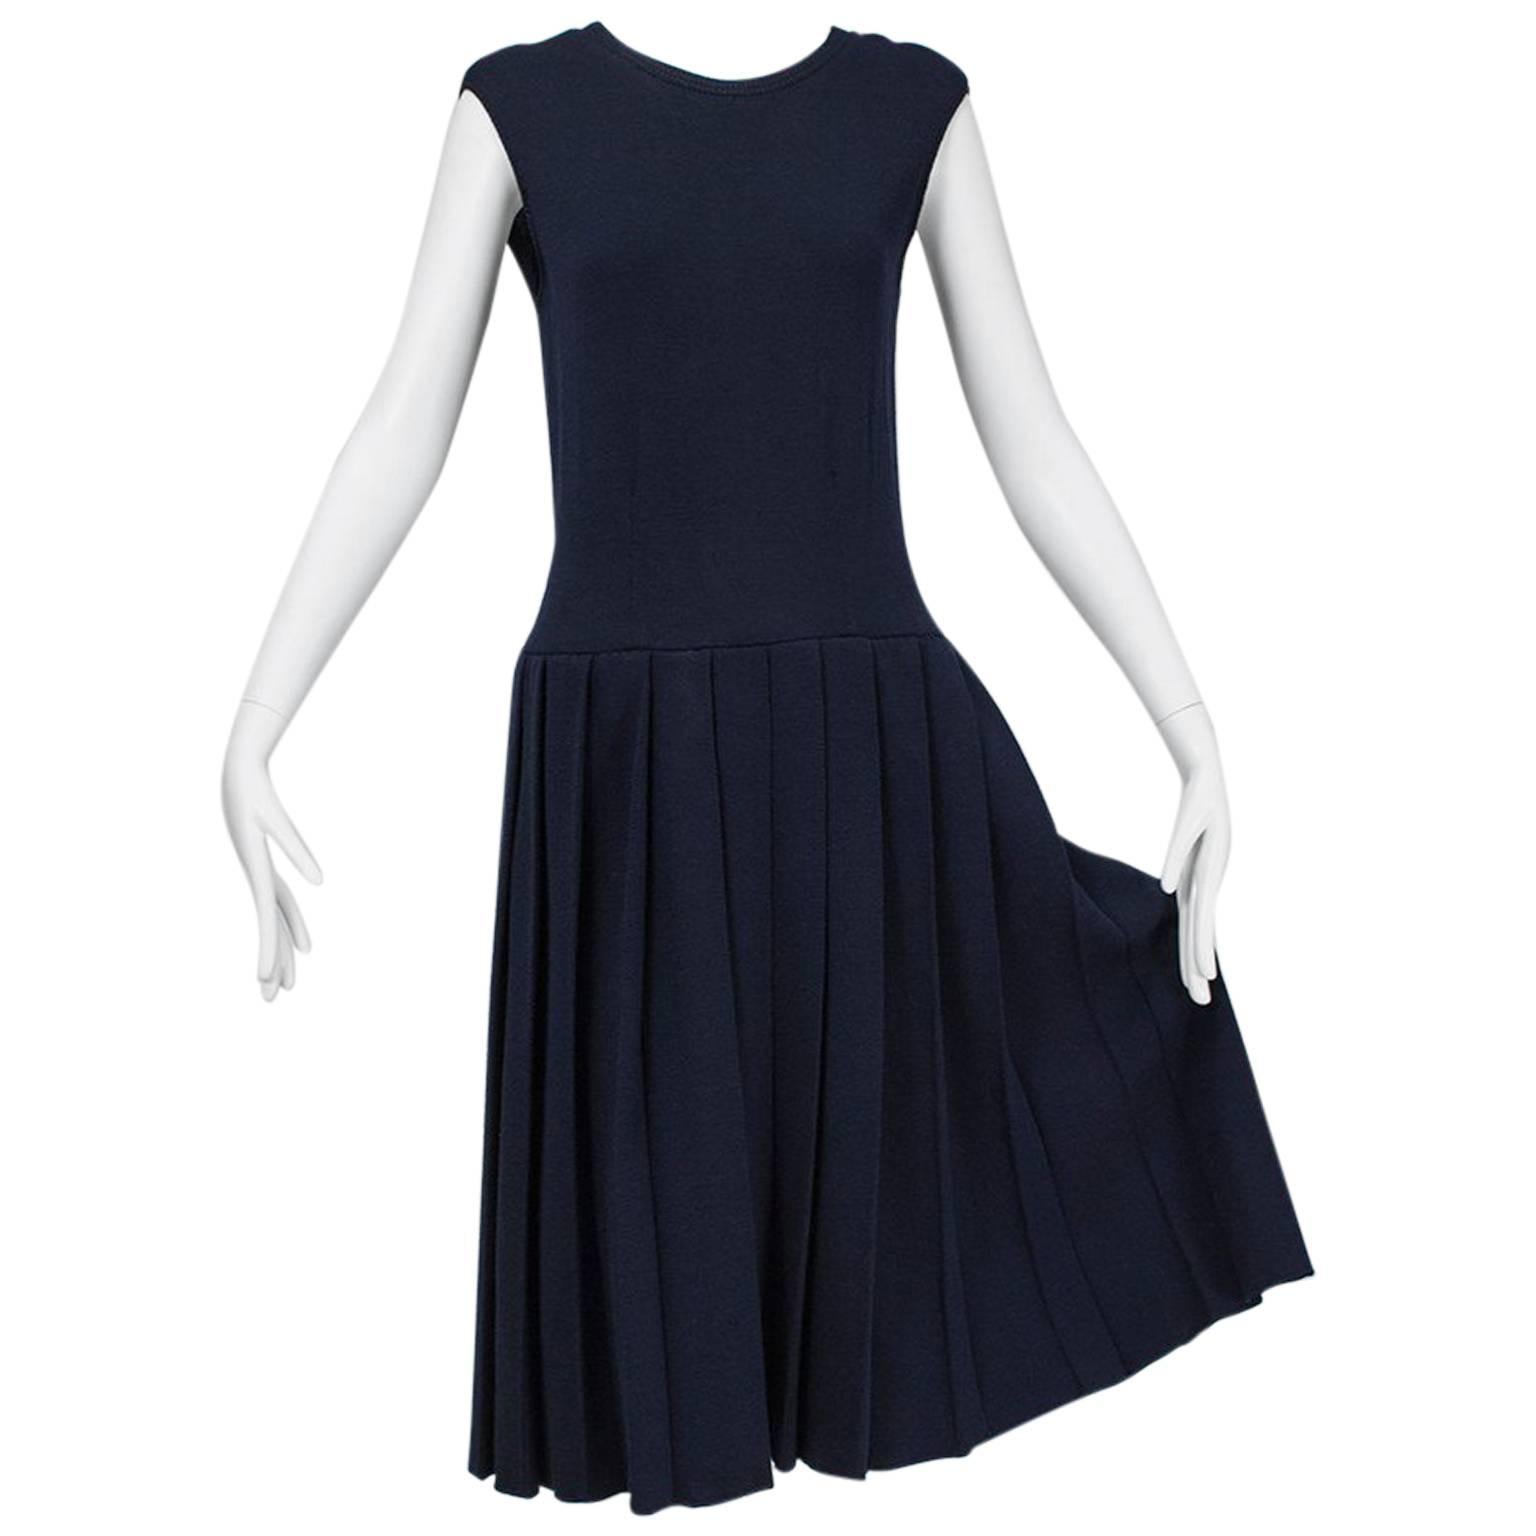 Norman Norell Navy Knife Pleat Knit Dress, 1960s